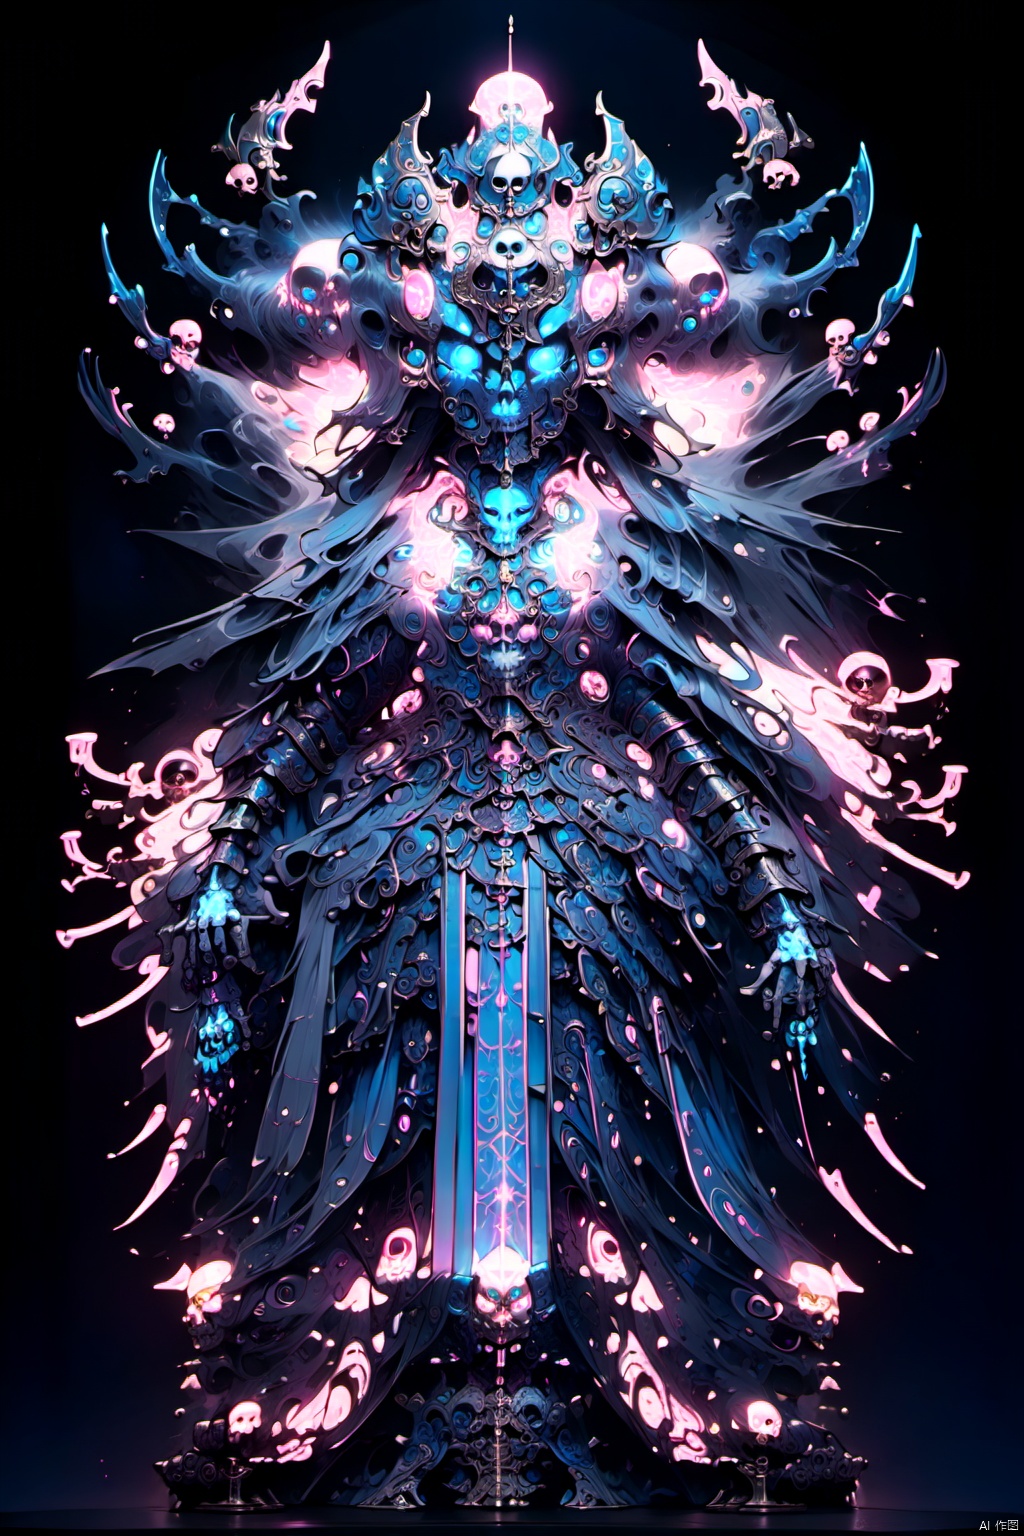  solo,(masterpiece), (best quality),An intricately designed, ethereal figure with a skull-like face, glowing eyes, and ornate armor stands against a dark background. The figure is adorned with blue and pink luminescent details, giving it an otherworldly and mystical appearance